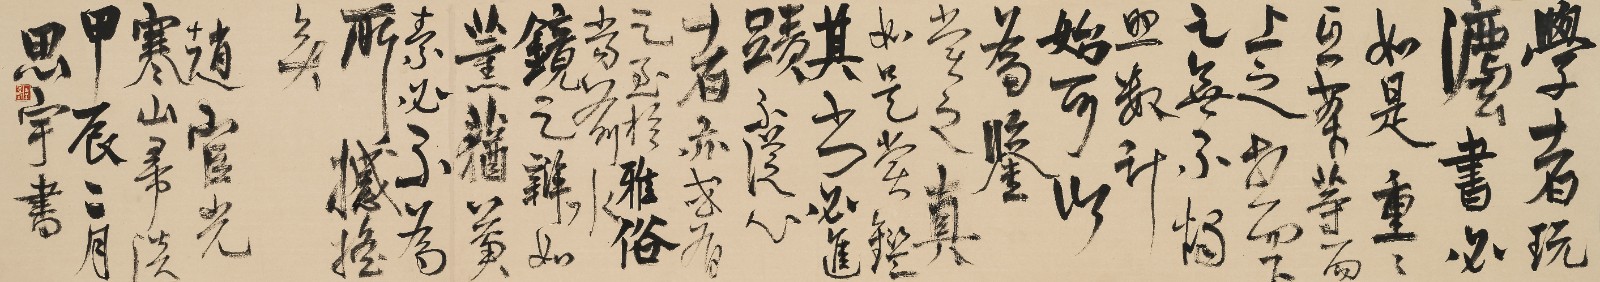 05 An article from “Hanshan Talk” by Zhao Huanguang in Running Style, 35cm×180cm, Calligraphy on paper, 2024.jpg